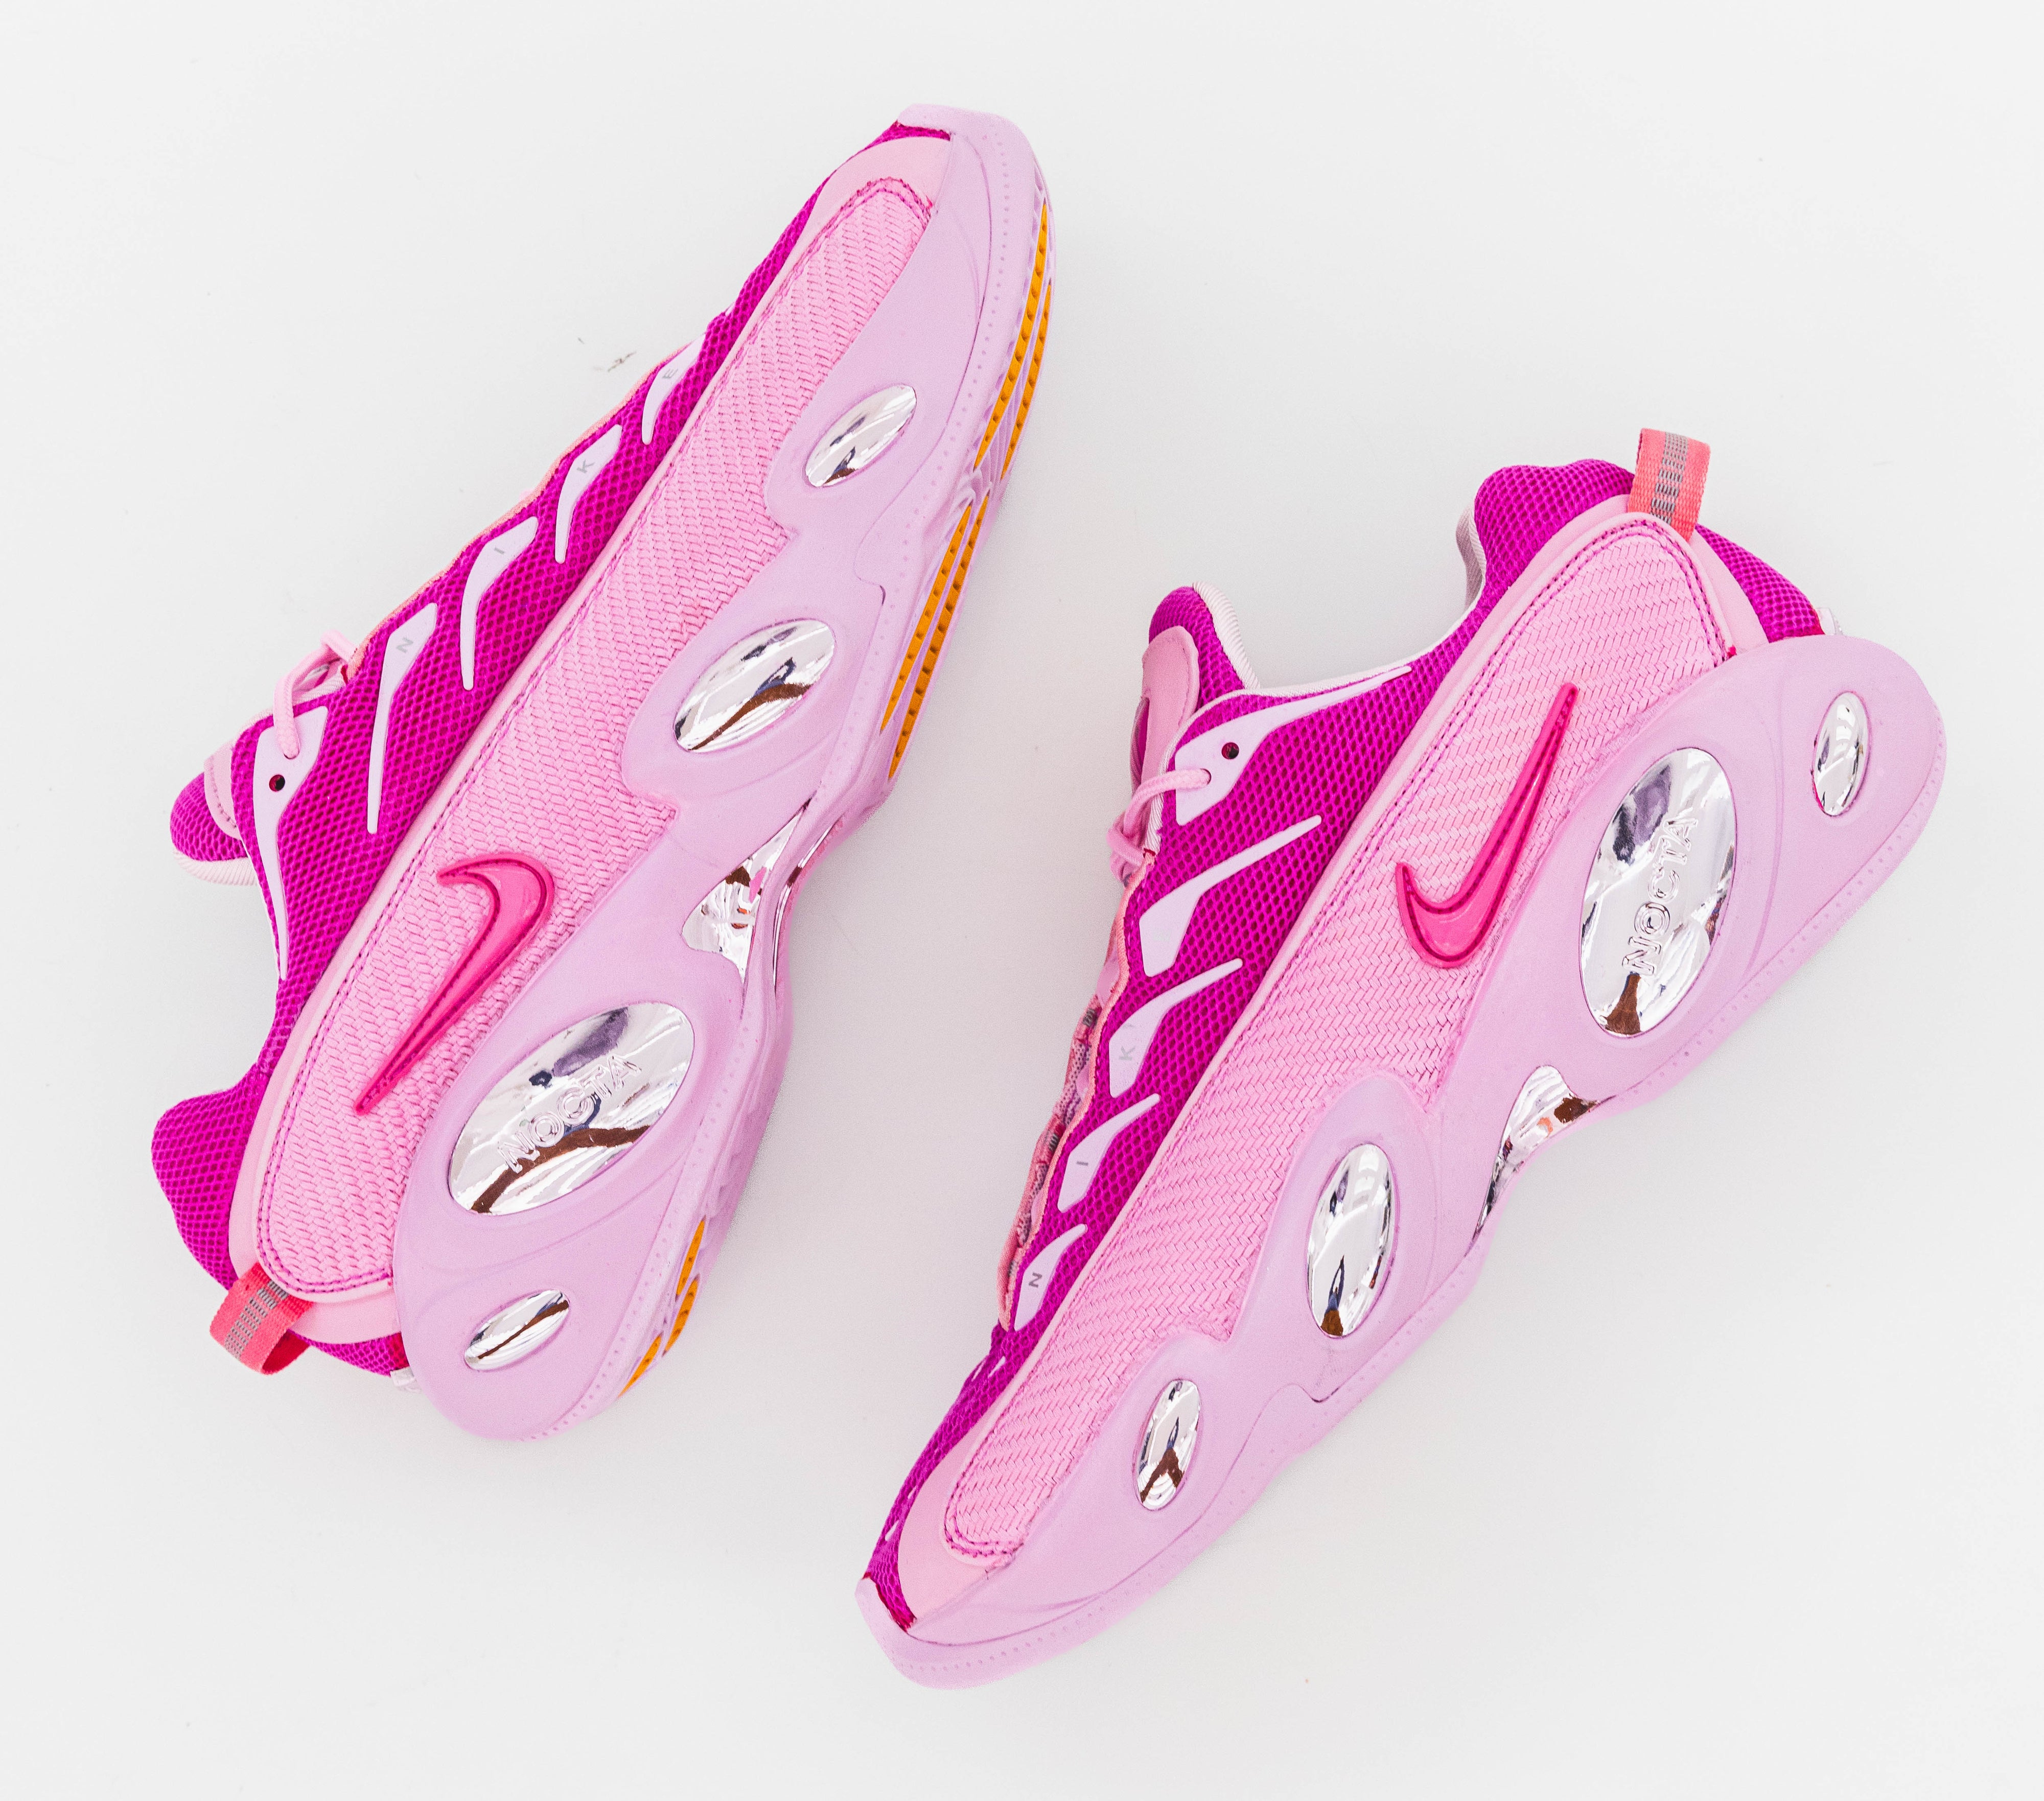 Drake x Nike NOCTA Glide Pink by The Surgeon Sole